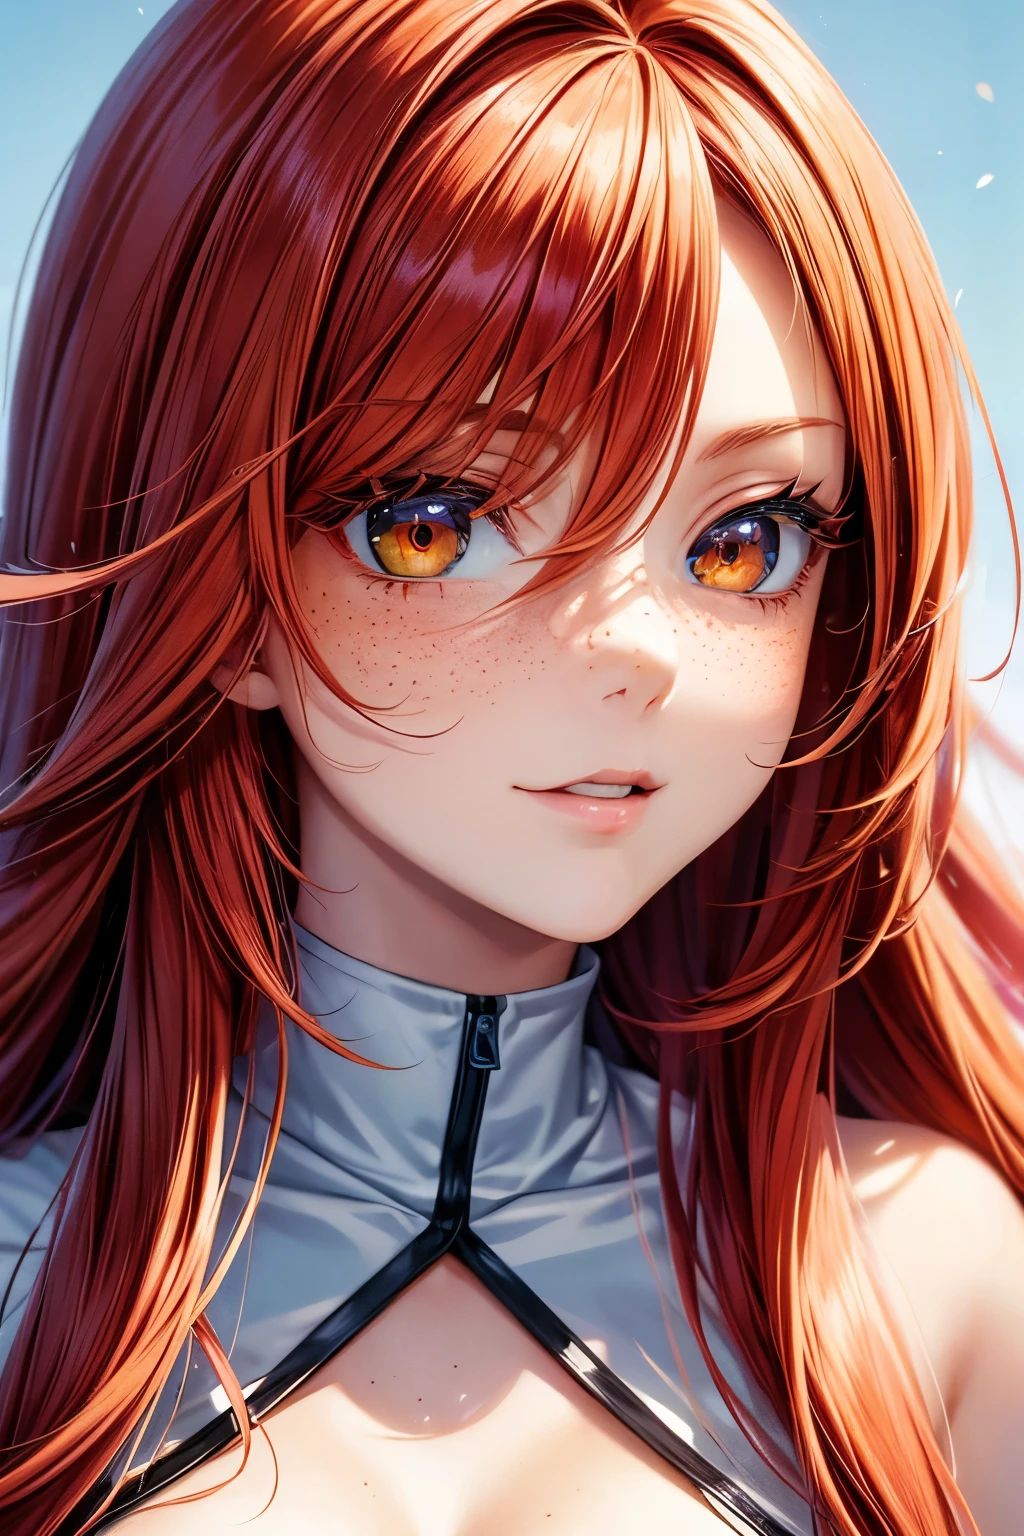 masterpiece, best quality, {best quality}, {{masterpiece}}, {highres}, focus, anime style, a closeup of a cartoon of a woman, girl design, portrait, giesha, anime image, long hair, red hair, redhead, straight eyes, polished and powerful look, exotic, tall, freckles, cheerful, casual chic clothing, colorful, colors  